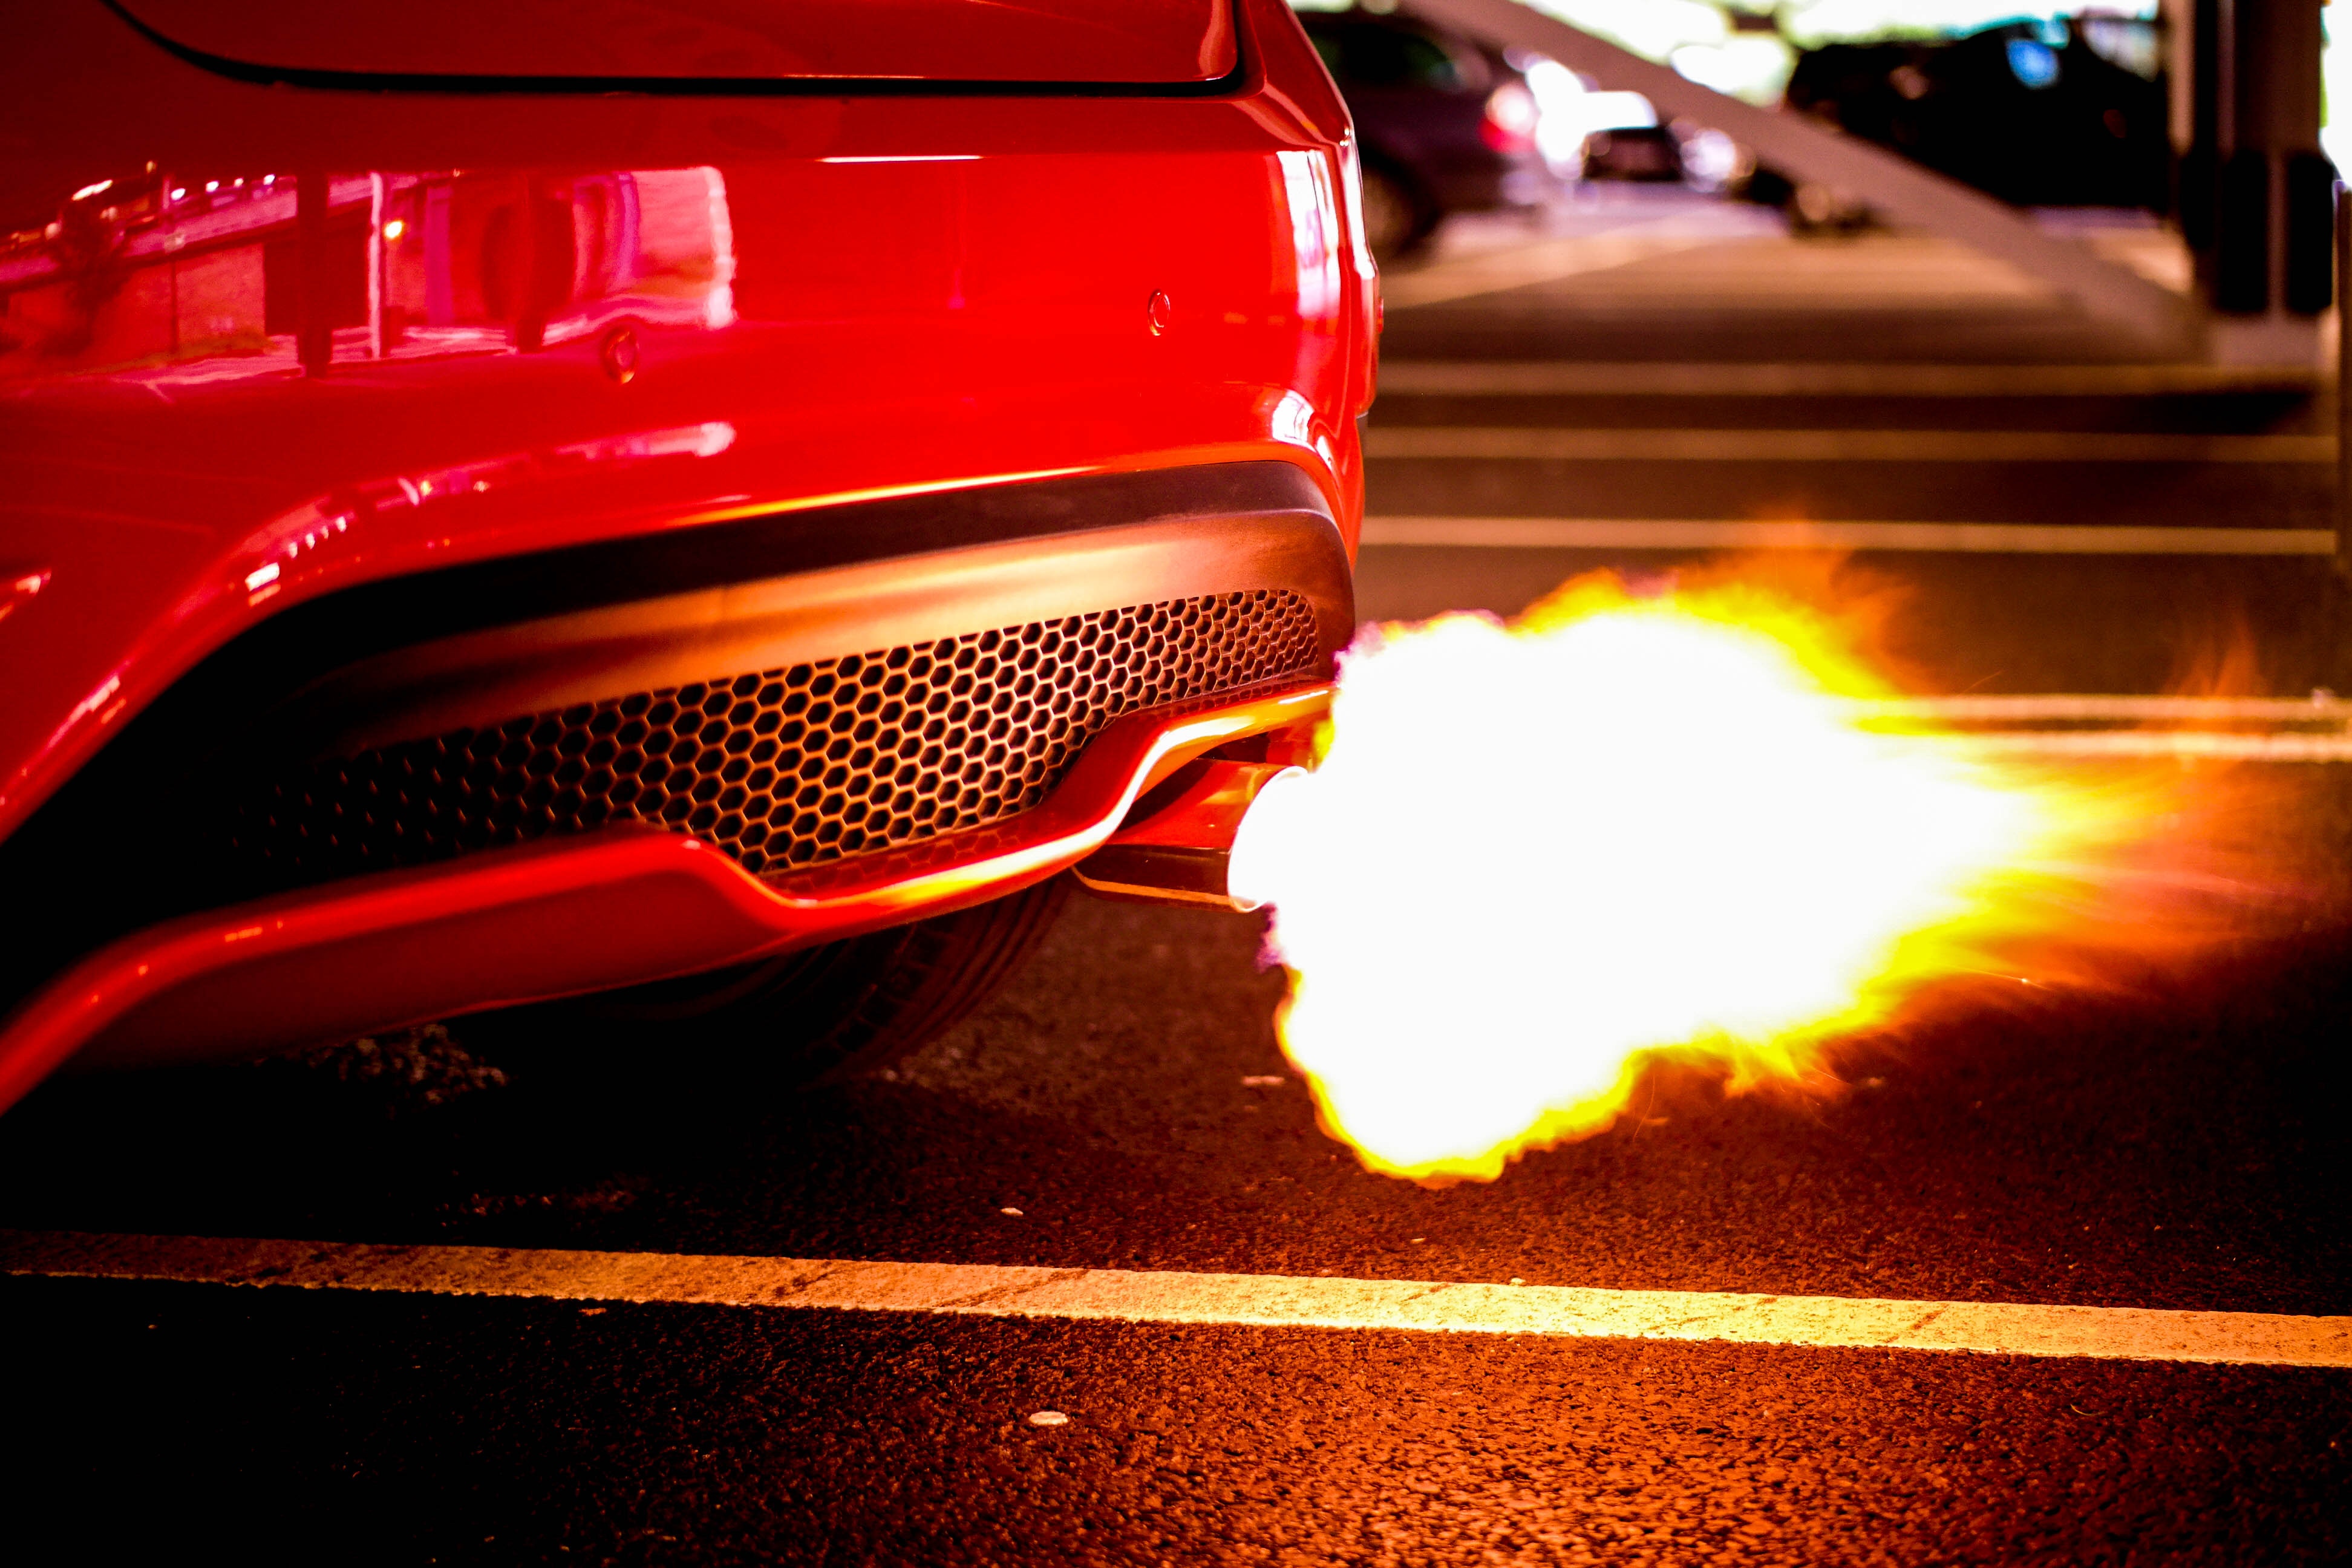 3888x2592 #speed, #sports car, #car, #engine, #car light, #car background, #ricer, #exhaust, #modified, #fast, #fire, #car wallpaper, #ignite, #wallpaper, #ford, #fiestum, #Free image, #car ignite, #flame, #backfire, #road HD Wallpaper